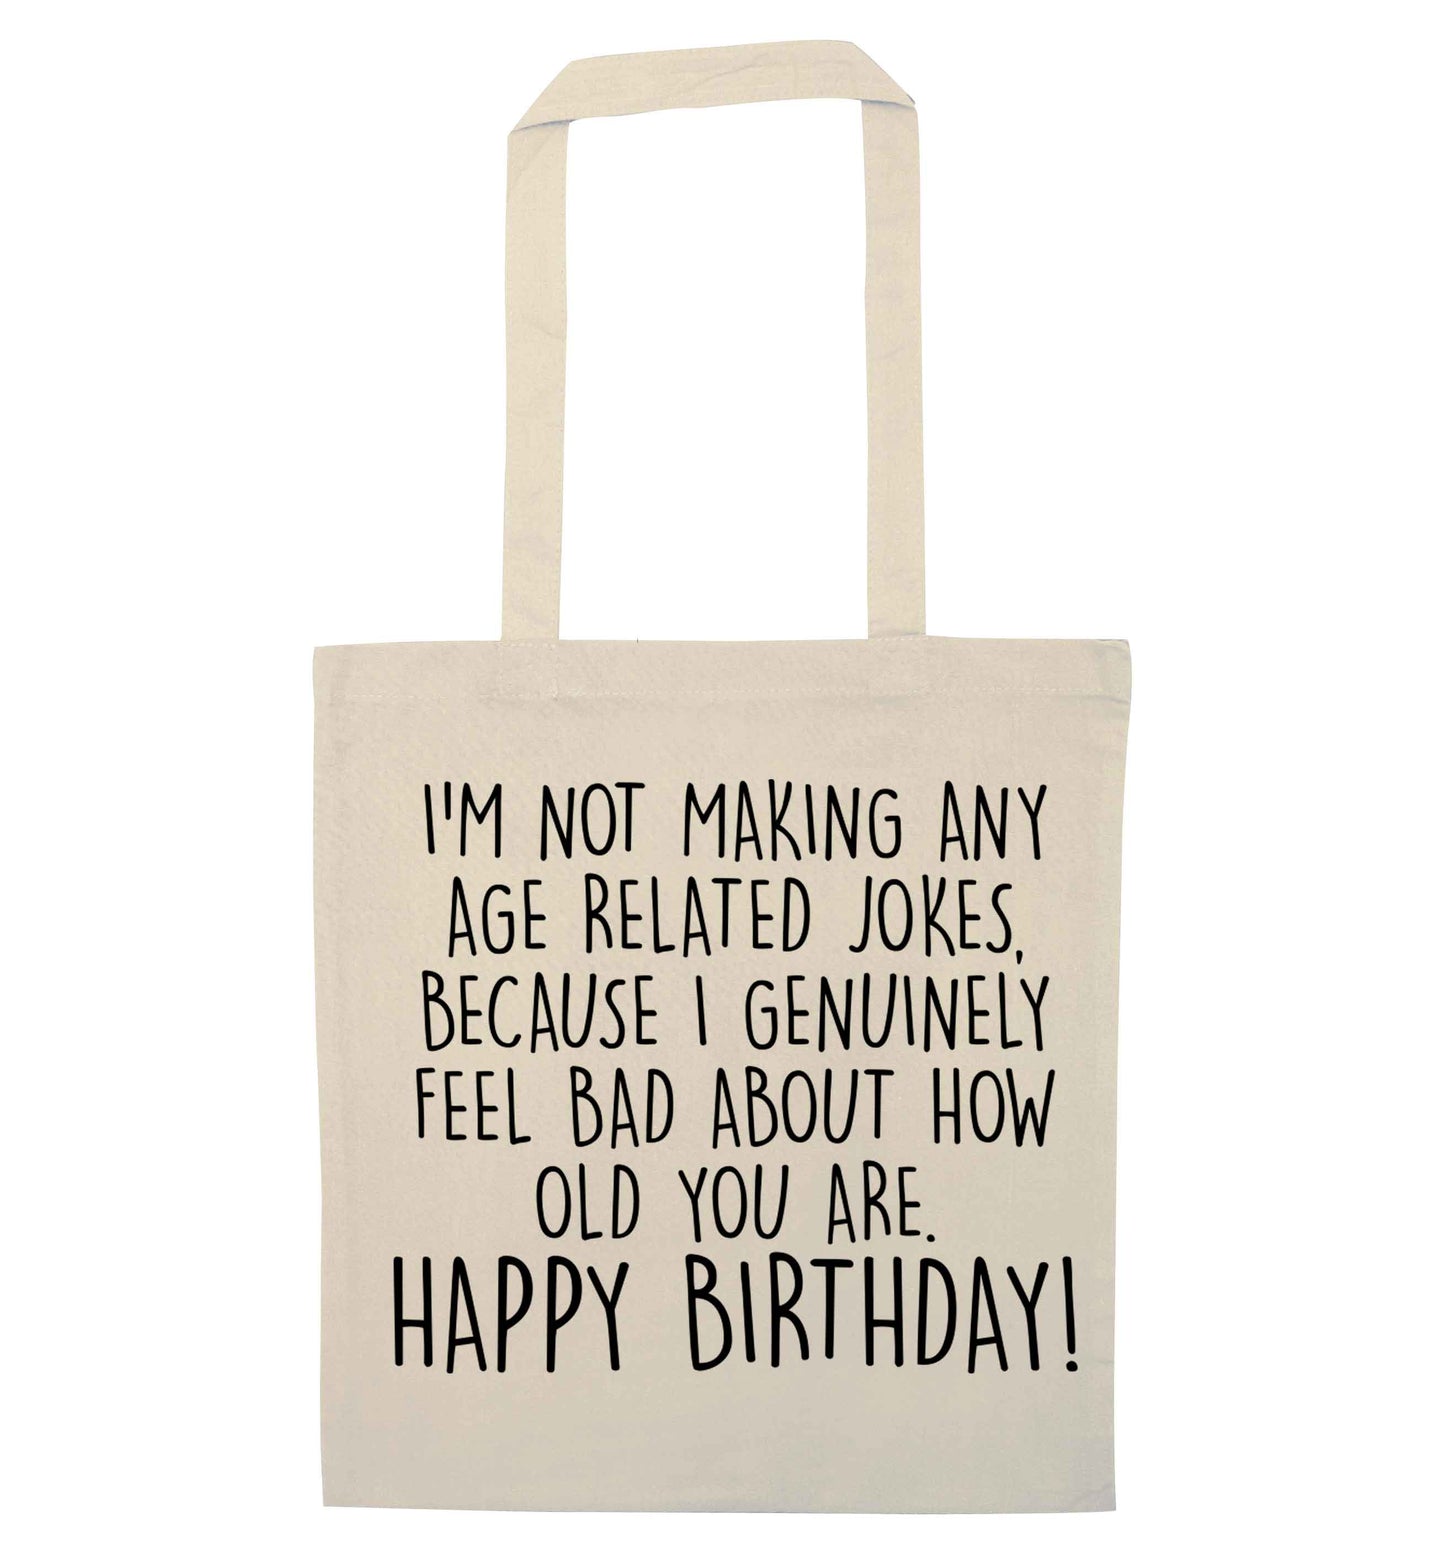 I'm not making any age related jokes because I genuinely feel bad for how old you are natural tote bag